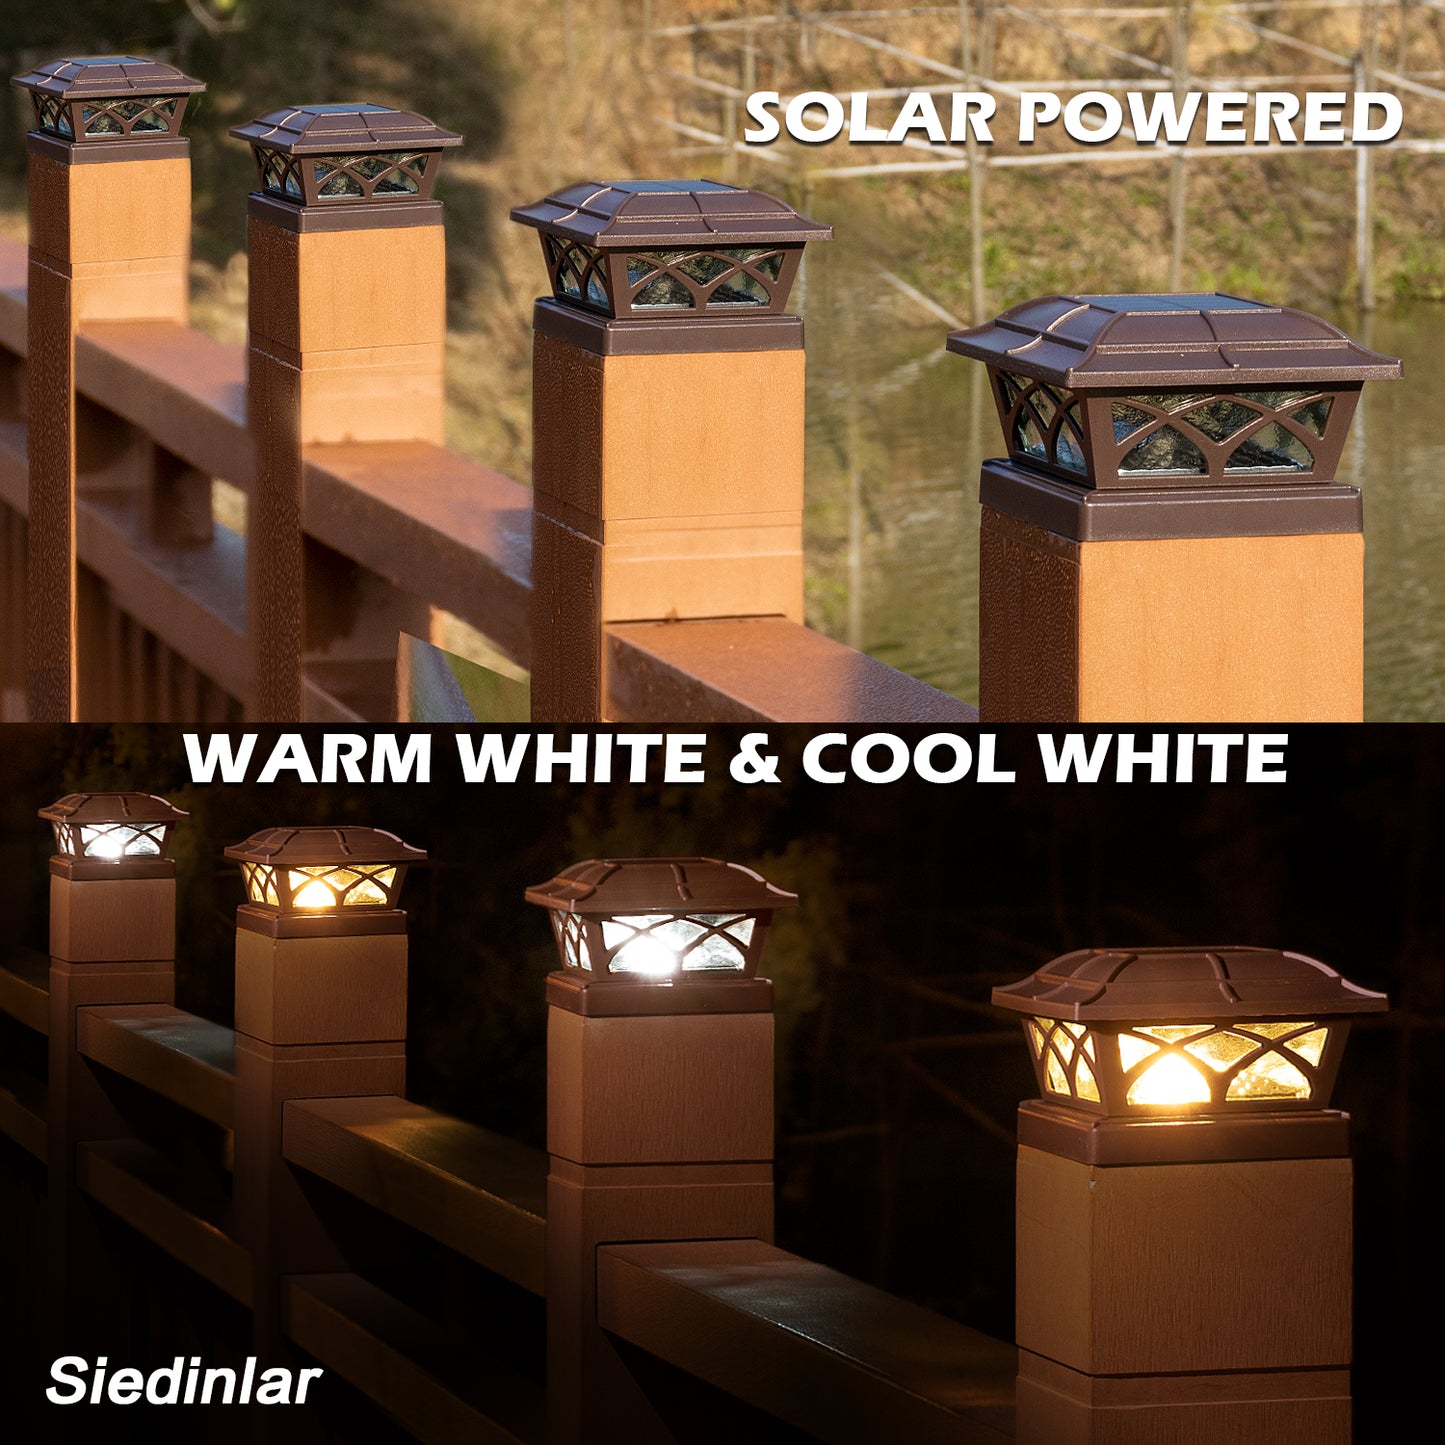 Siedinlar SD012Z Solar Post Cap Lights Outdoor Glass 2 Color Modes 8 LEDs for 4x4 5x5 6x6 Posts Deck Fence Patio Decoration Warm White & Cool White Lighting Brown (4 Pack)